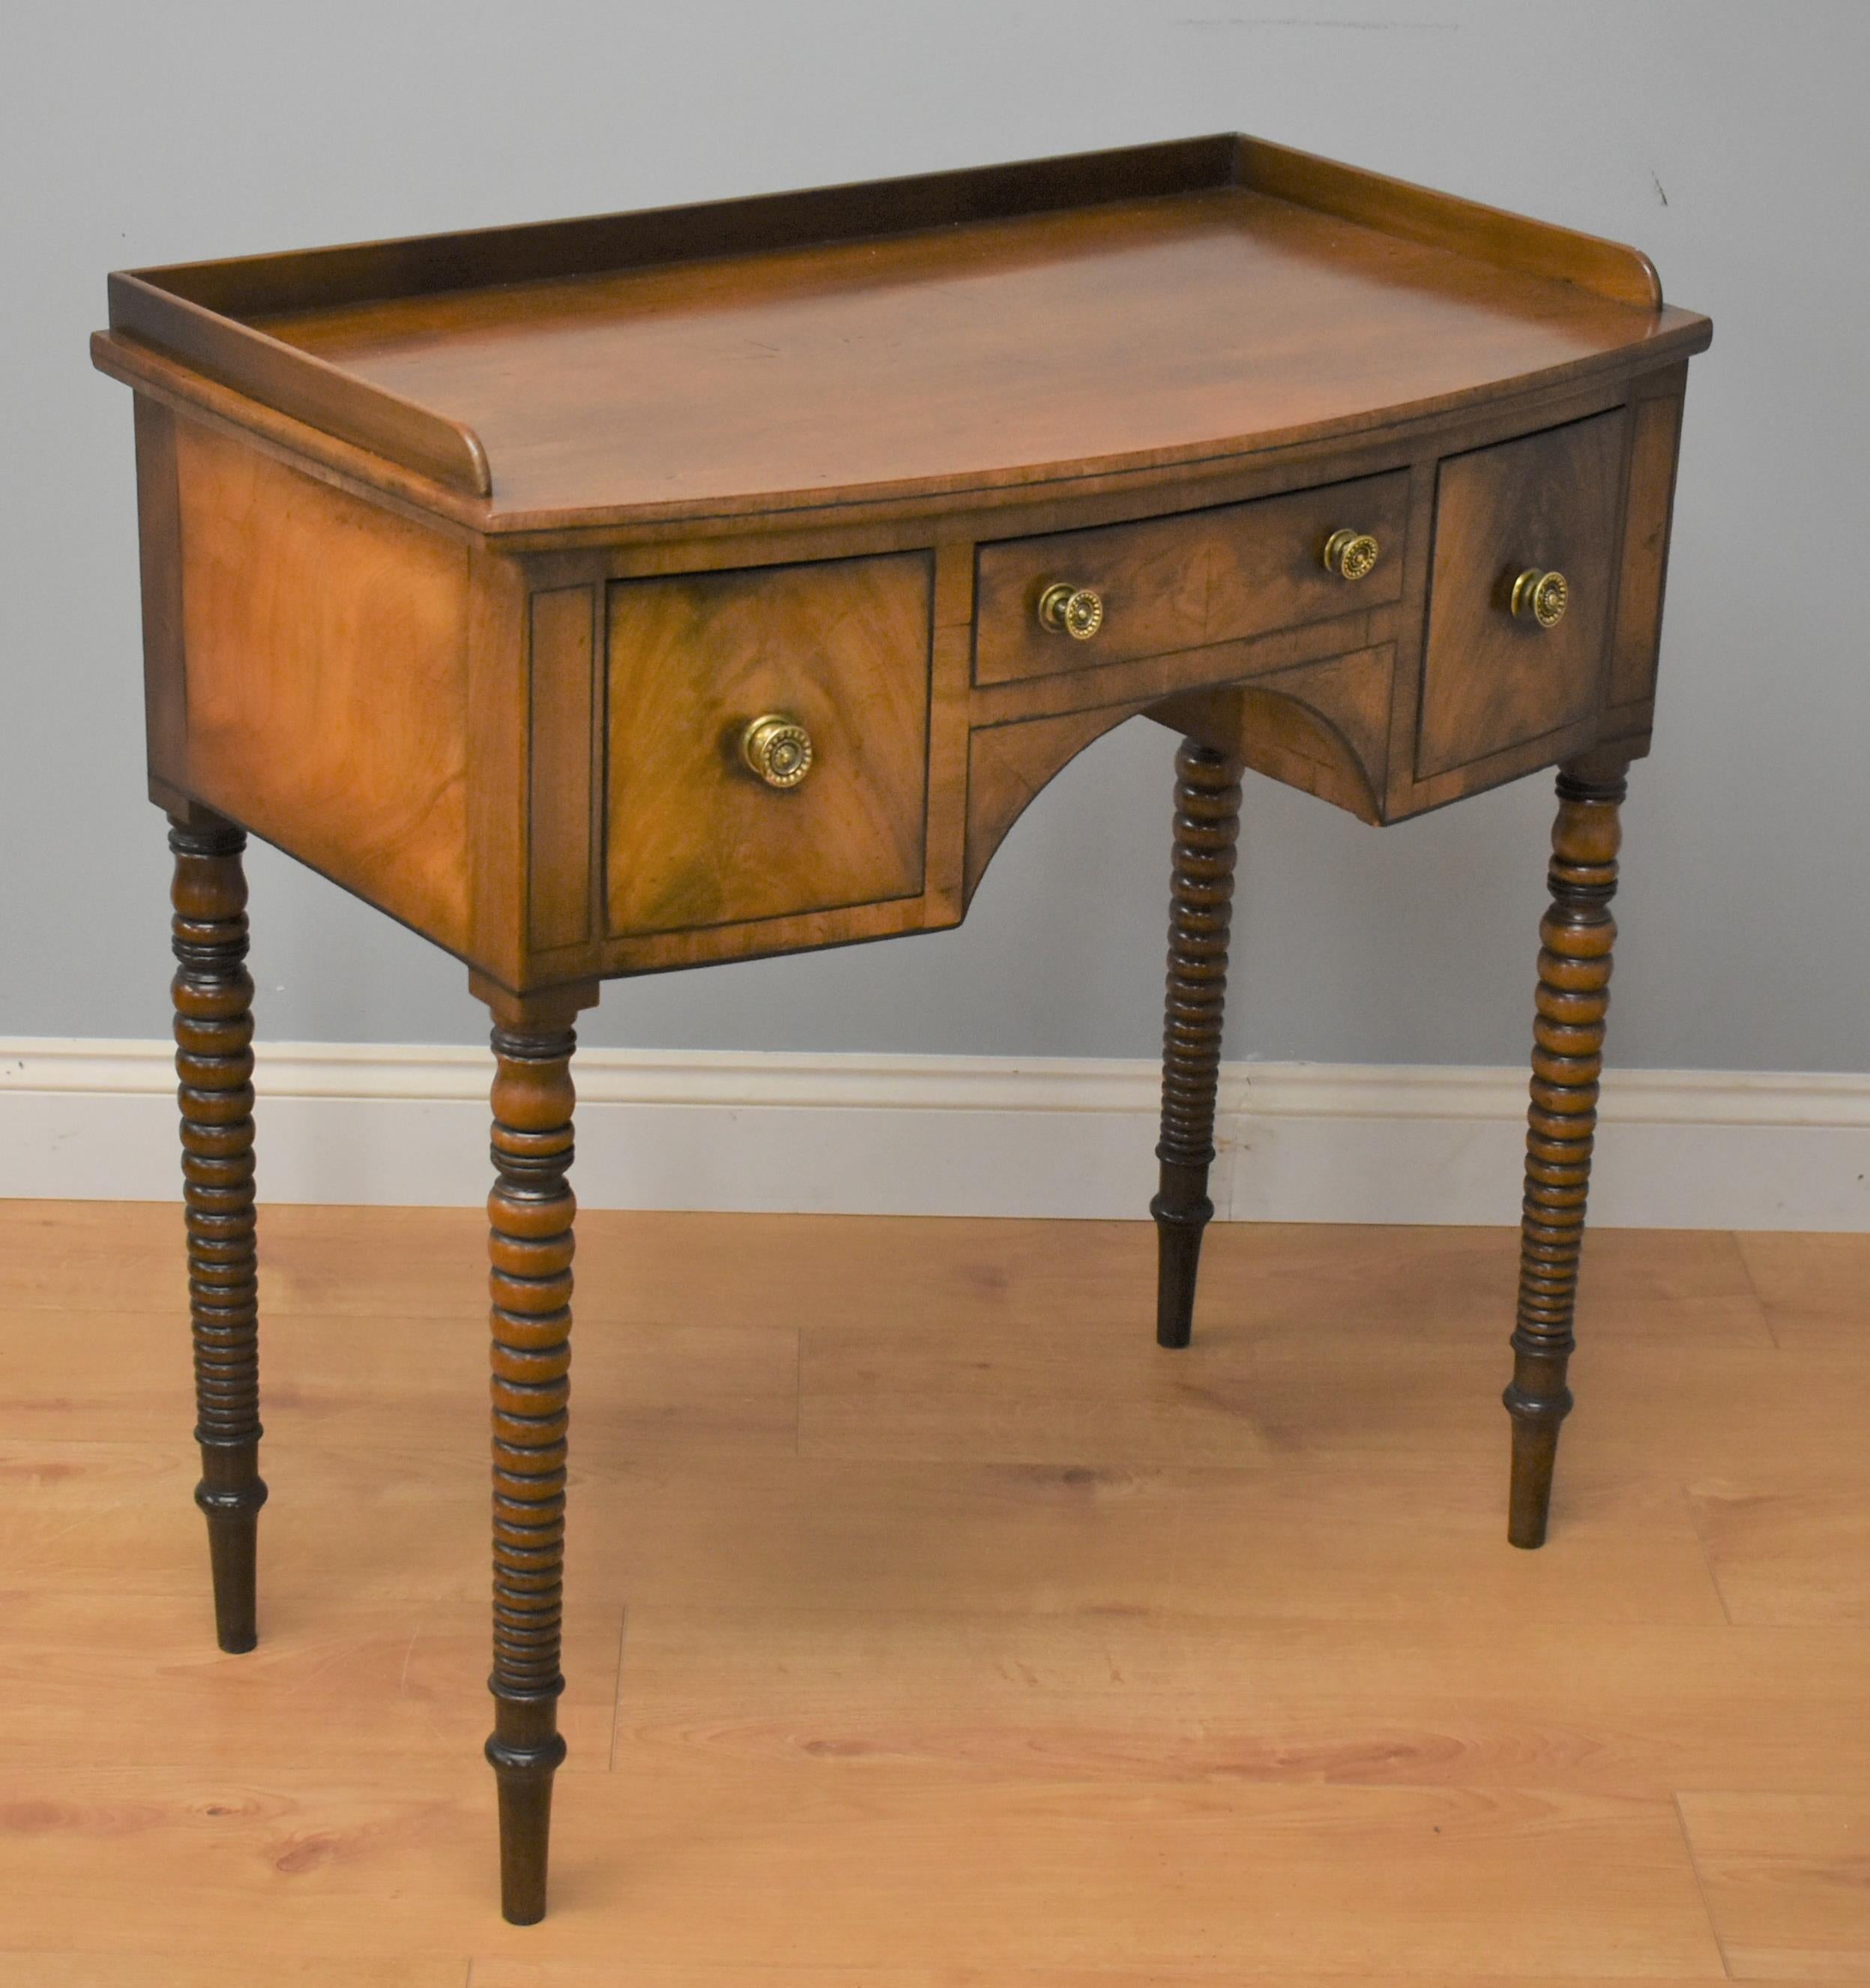 Regency mahogany bow front side table in very nice condition having been polished by traditional methods. The side table has three drawers one long to the centre and on either side a deep drawer. The side table stands on turned legs.